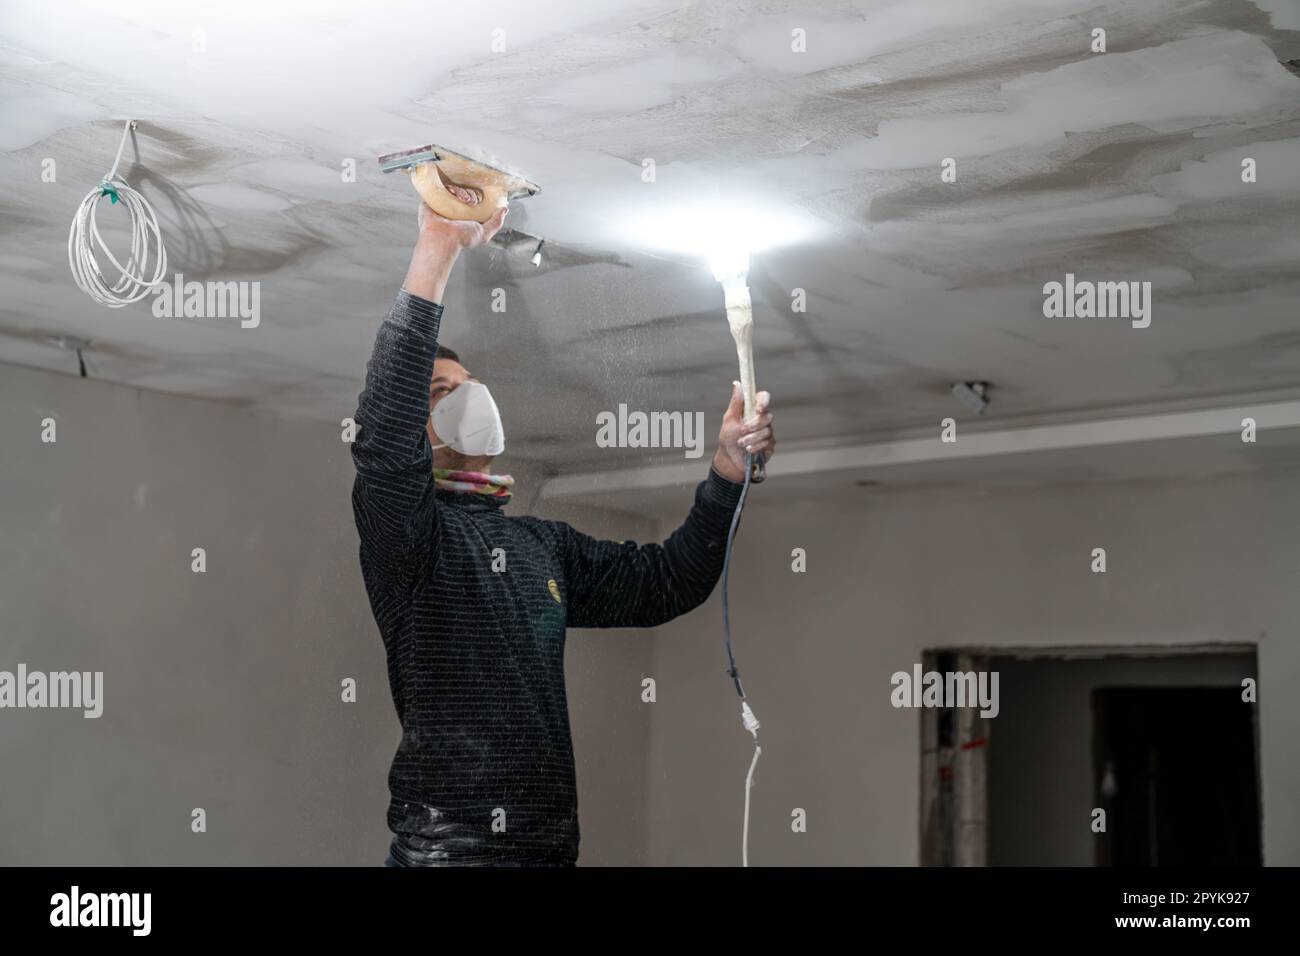 sanding a plasterboard ceiling in a new building with a trowel Stock Photo